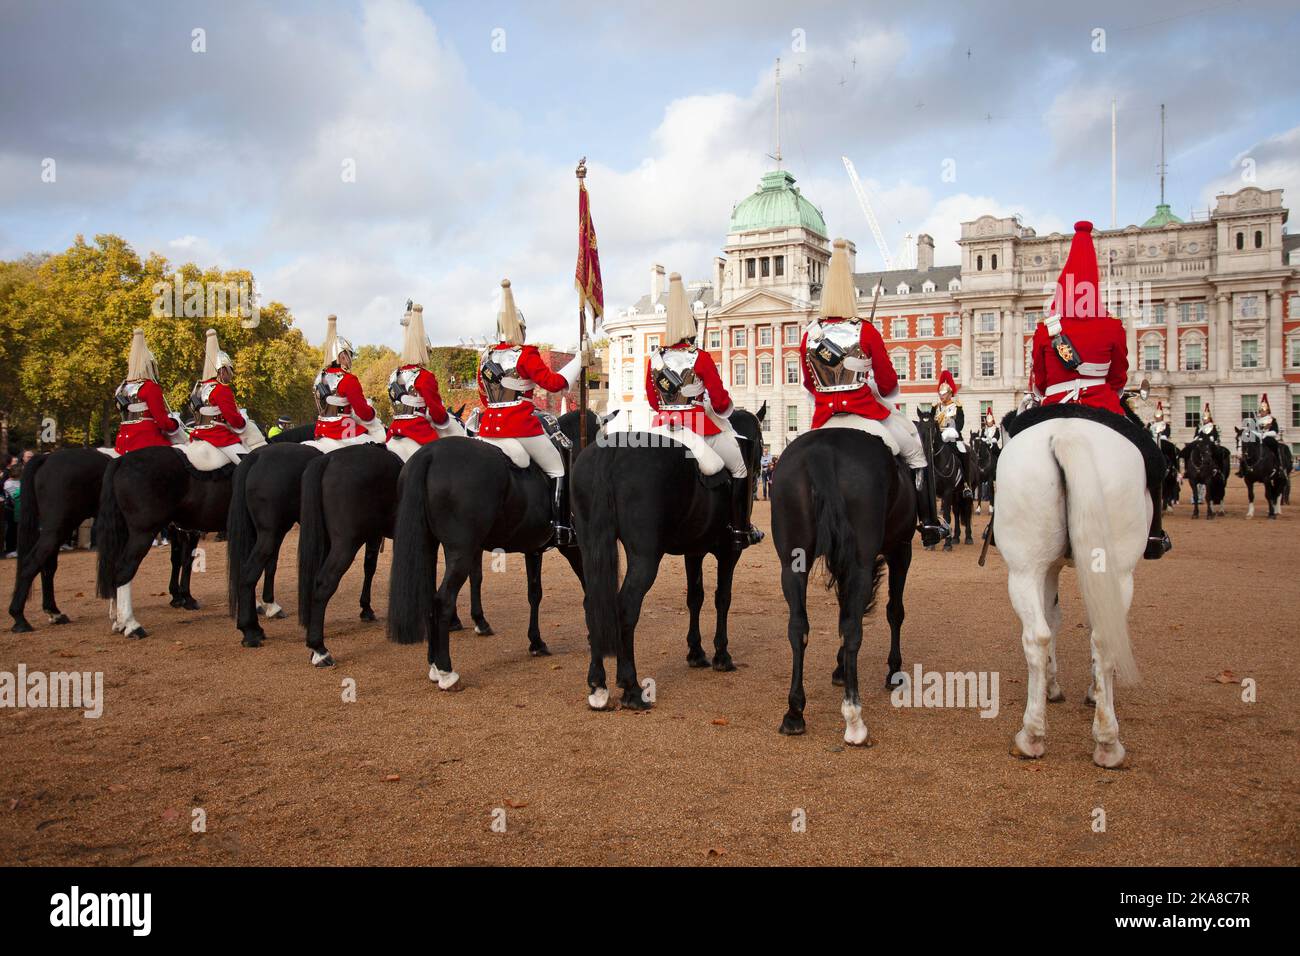 Ghanging of the guards. Horse guards parade. London England Stock Photo